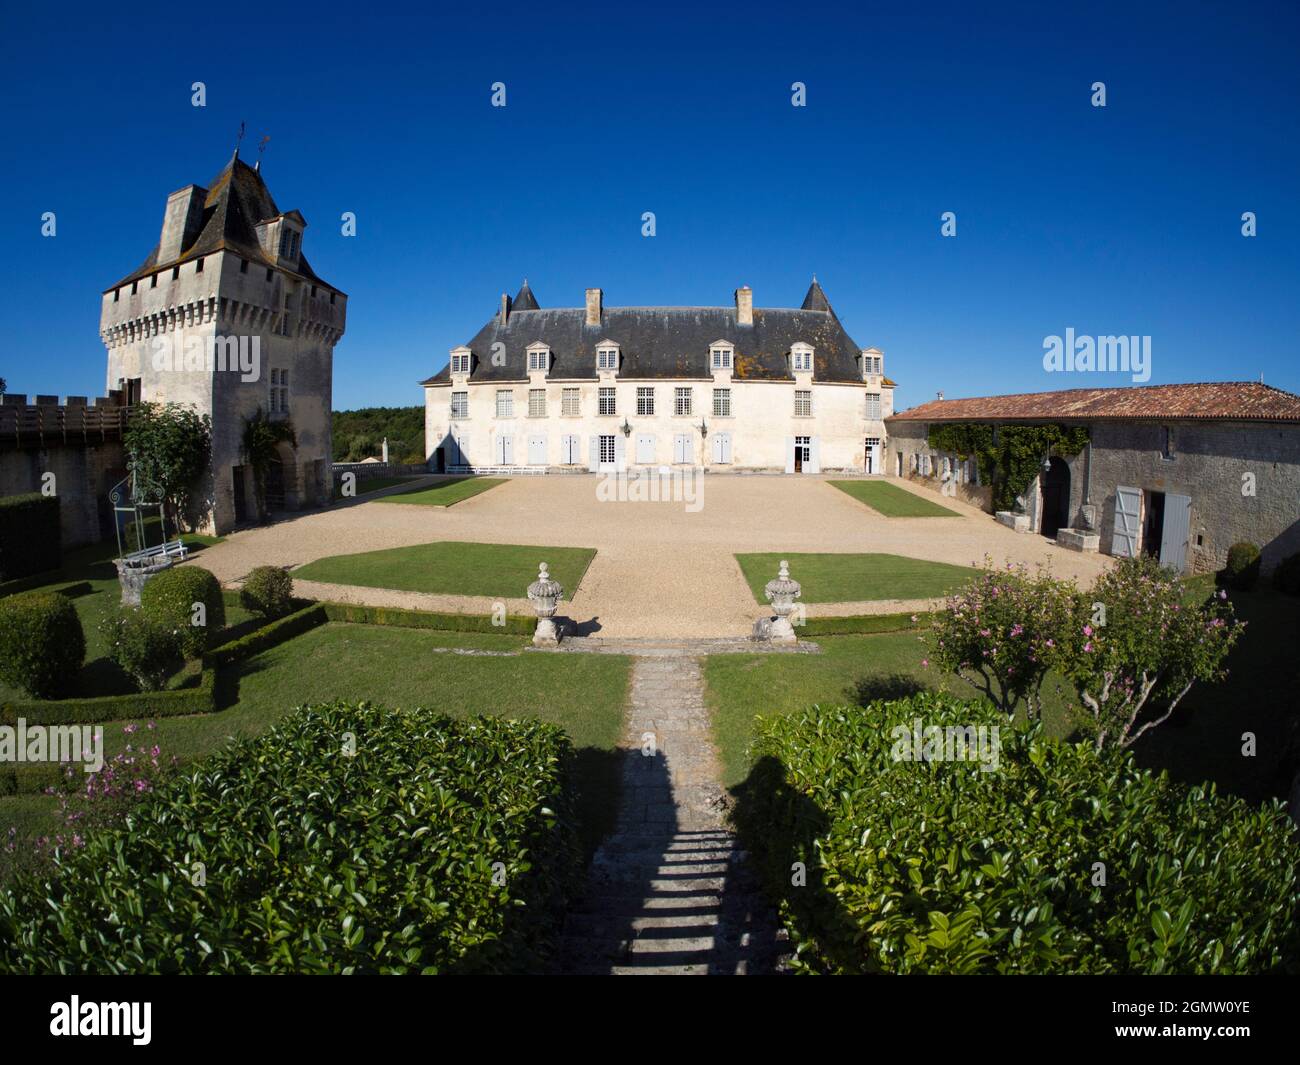 The striking Ch‰teau de la Roche Courbon, developed from an earlier castle, is located in the Charente-Maritime dpartement of France. Classified as a Stock Photo